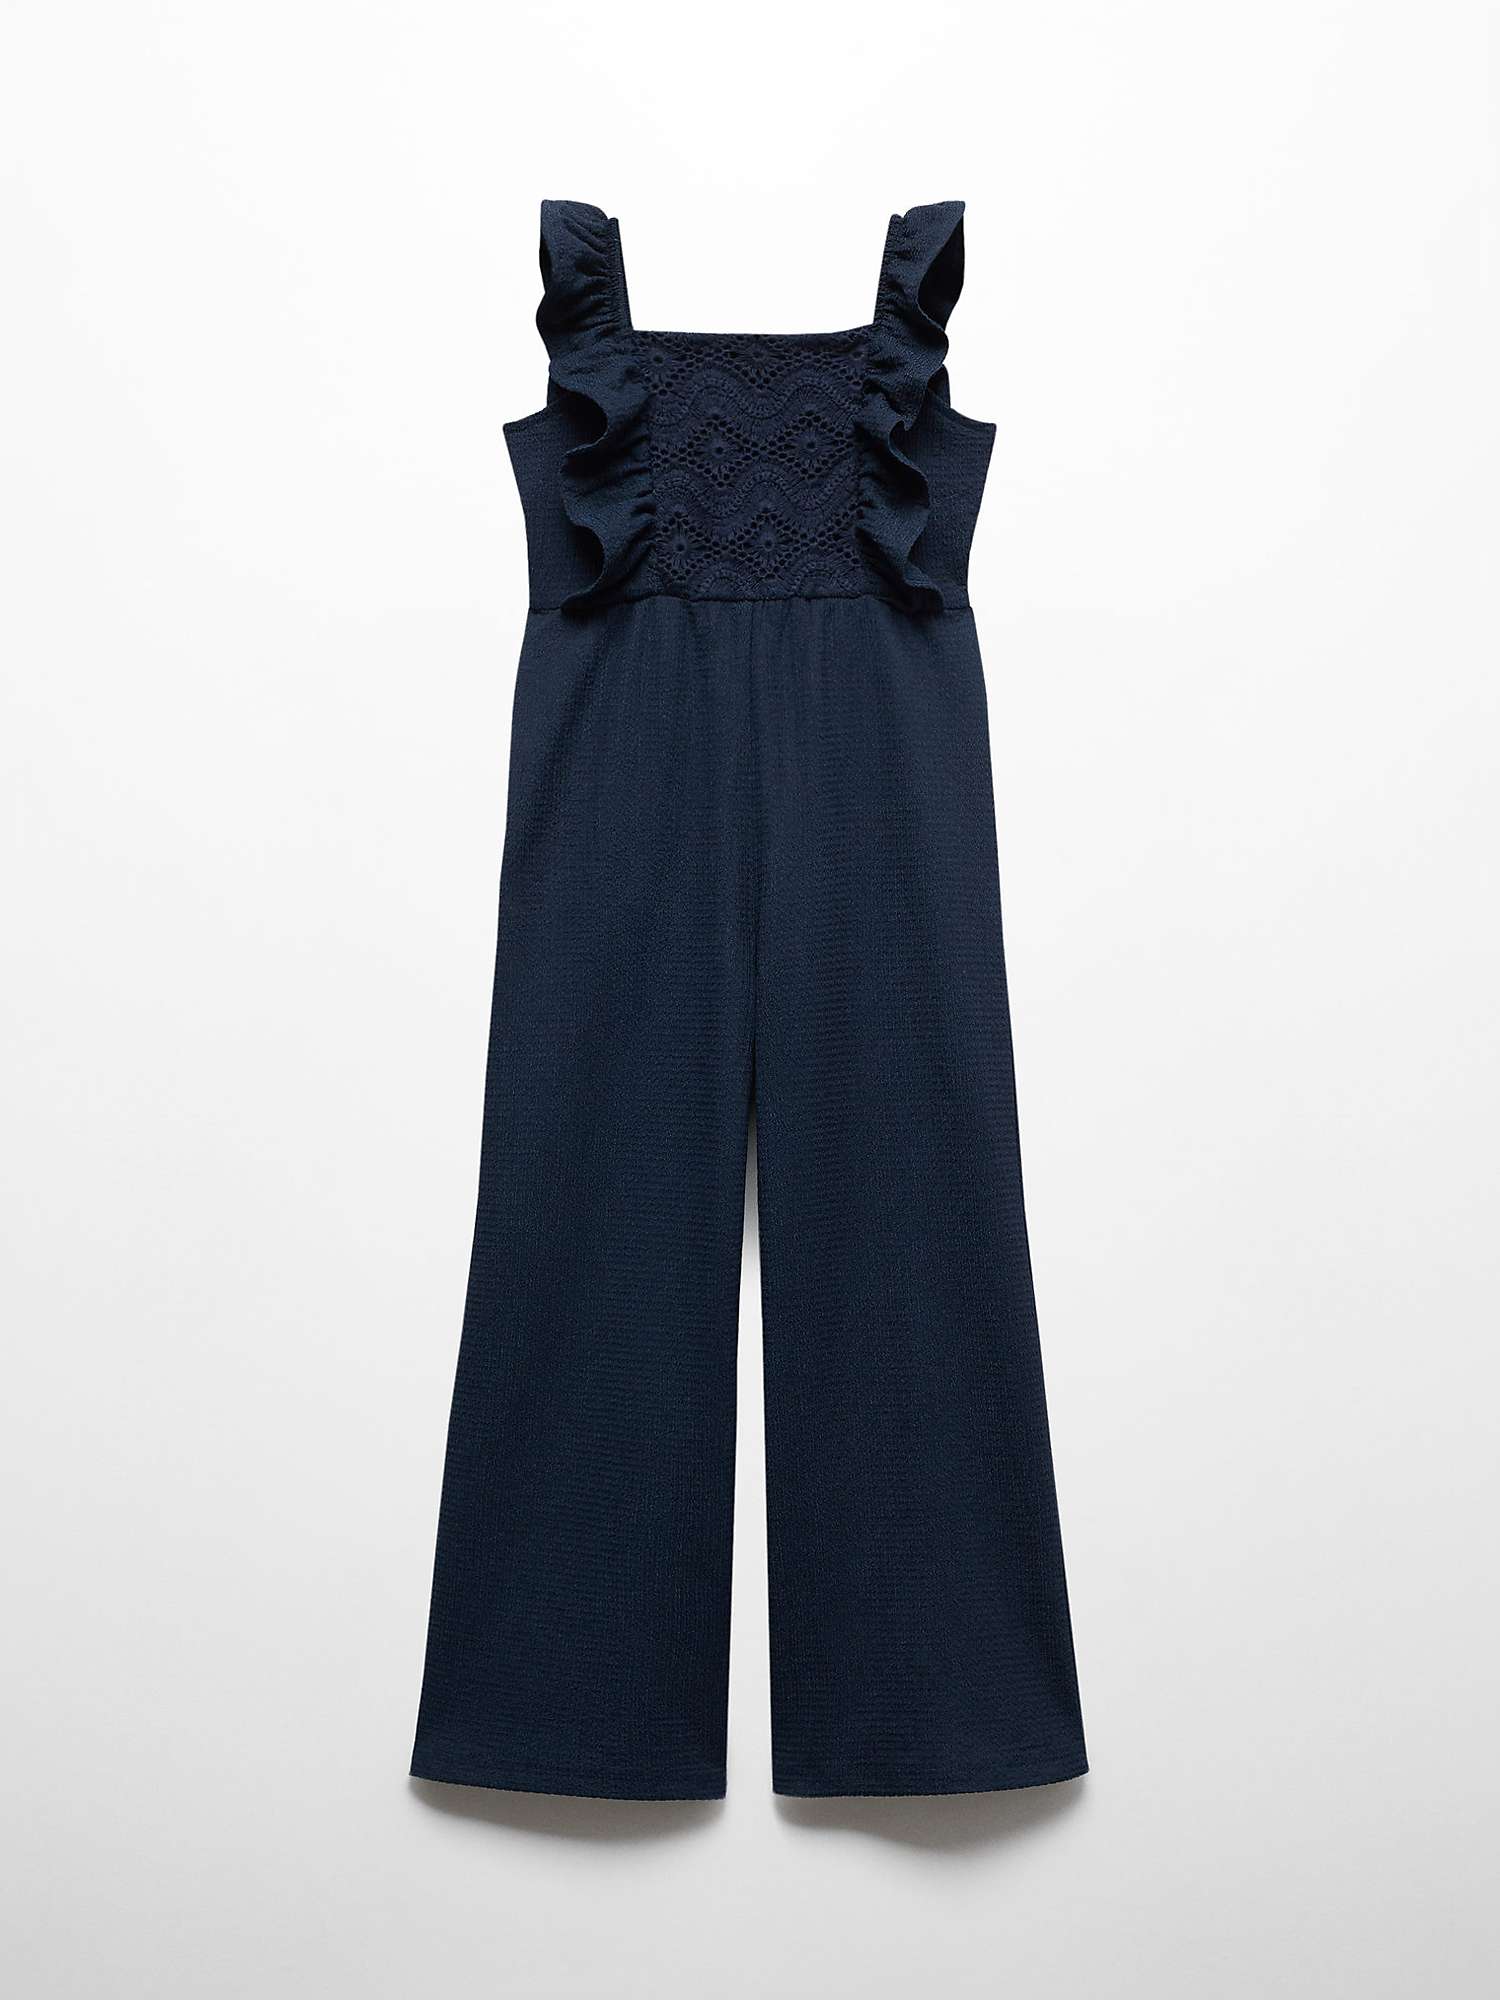 Buy Mango Kids' Crochi Embroidered Bodice Frill Jumpsuit, Navy Online at johnlewis.com